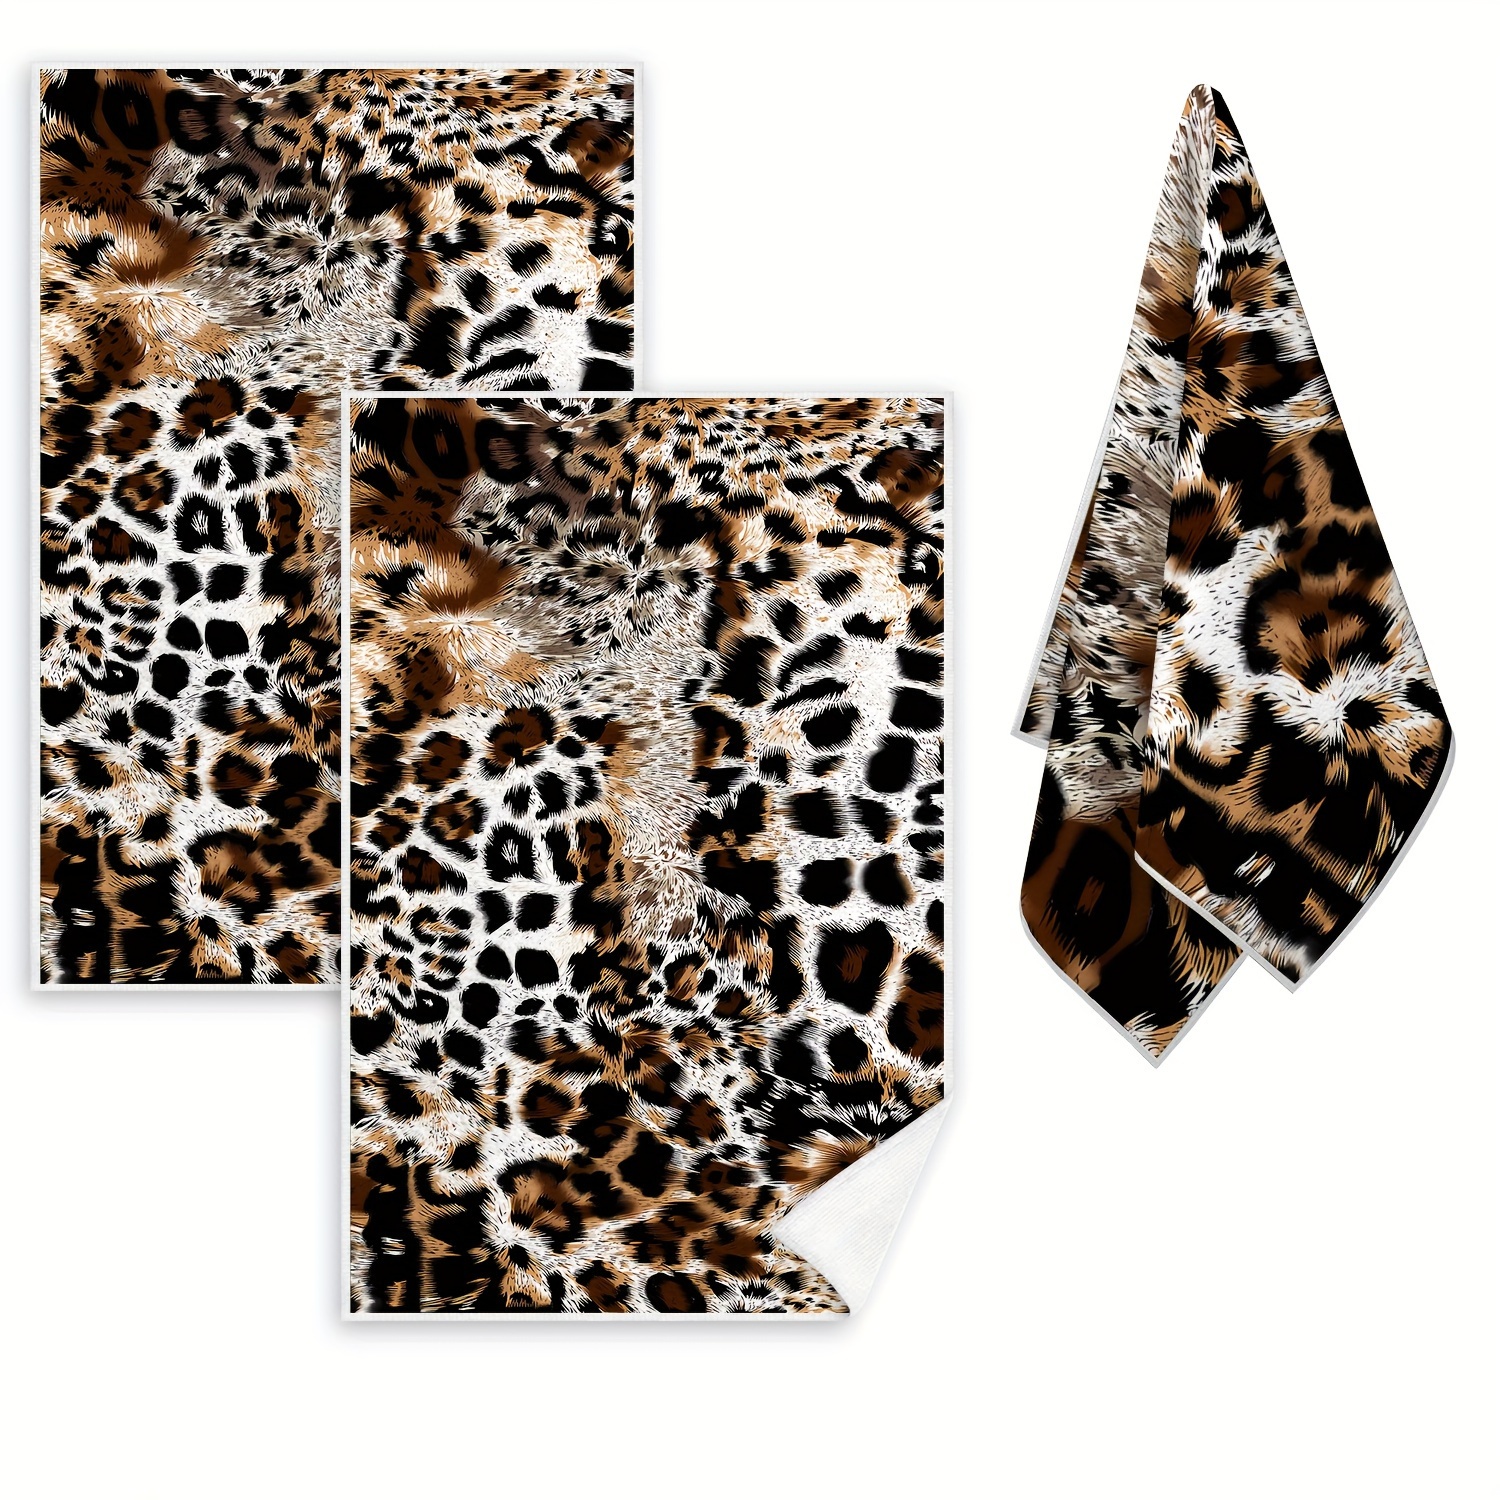 

2-piece Leopard Print Microfiber Kitchen Towels - Soft, Absorbent Dish Cloths For Cleaning & Decor